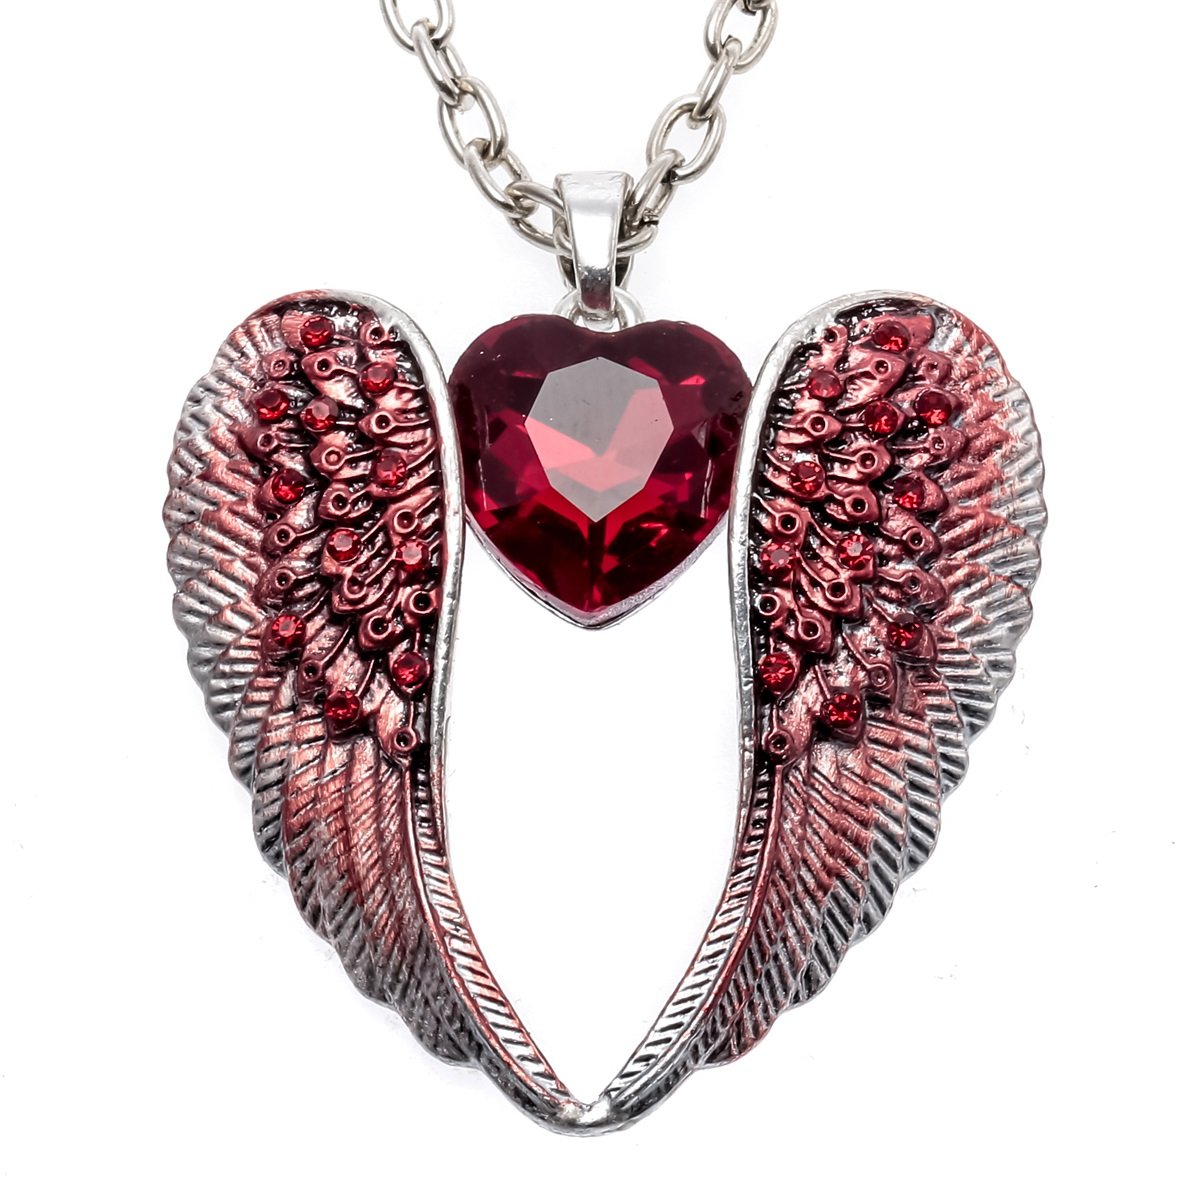 Antique Silver Chain Crystal Angel Wings Heart Necklace | Kirijewels.com